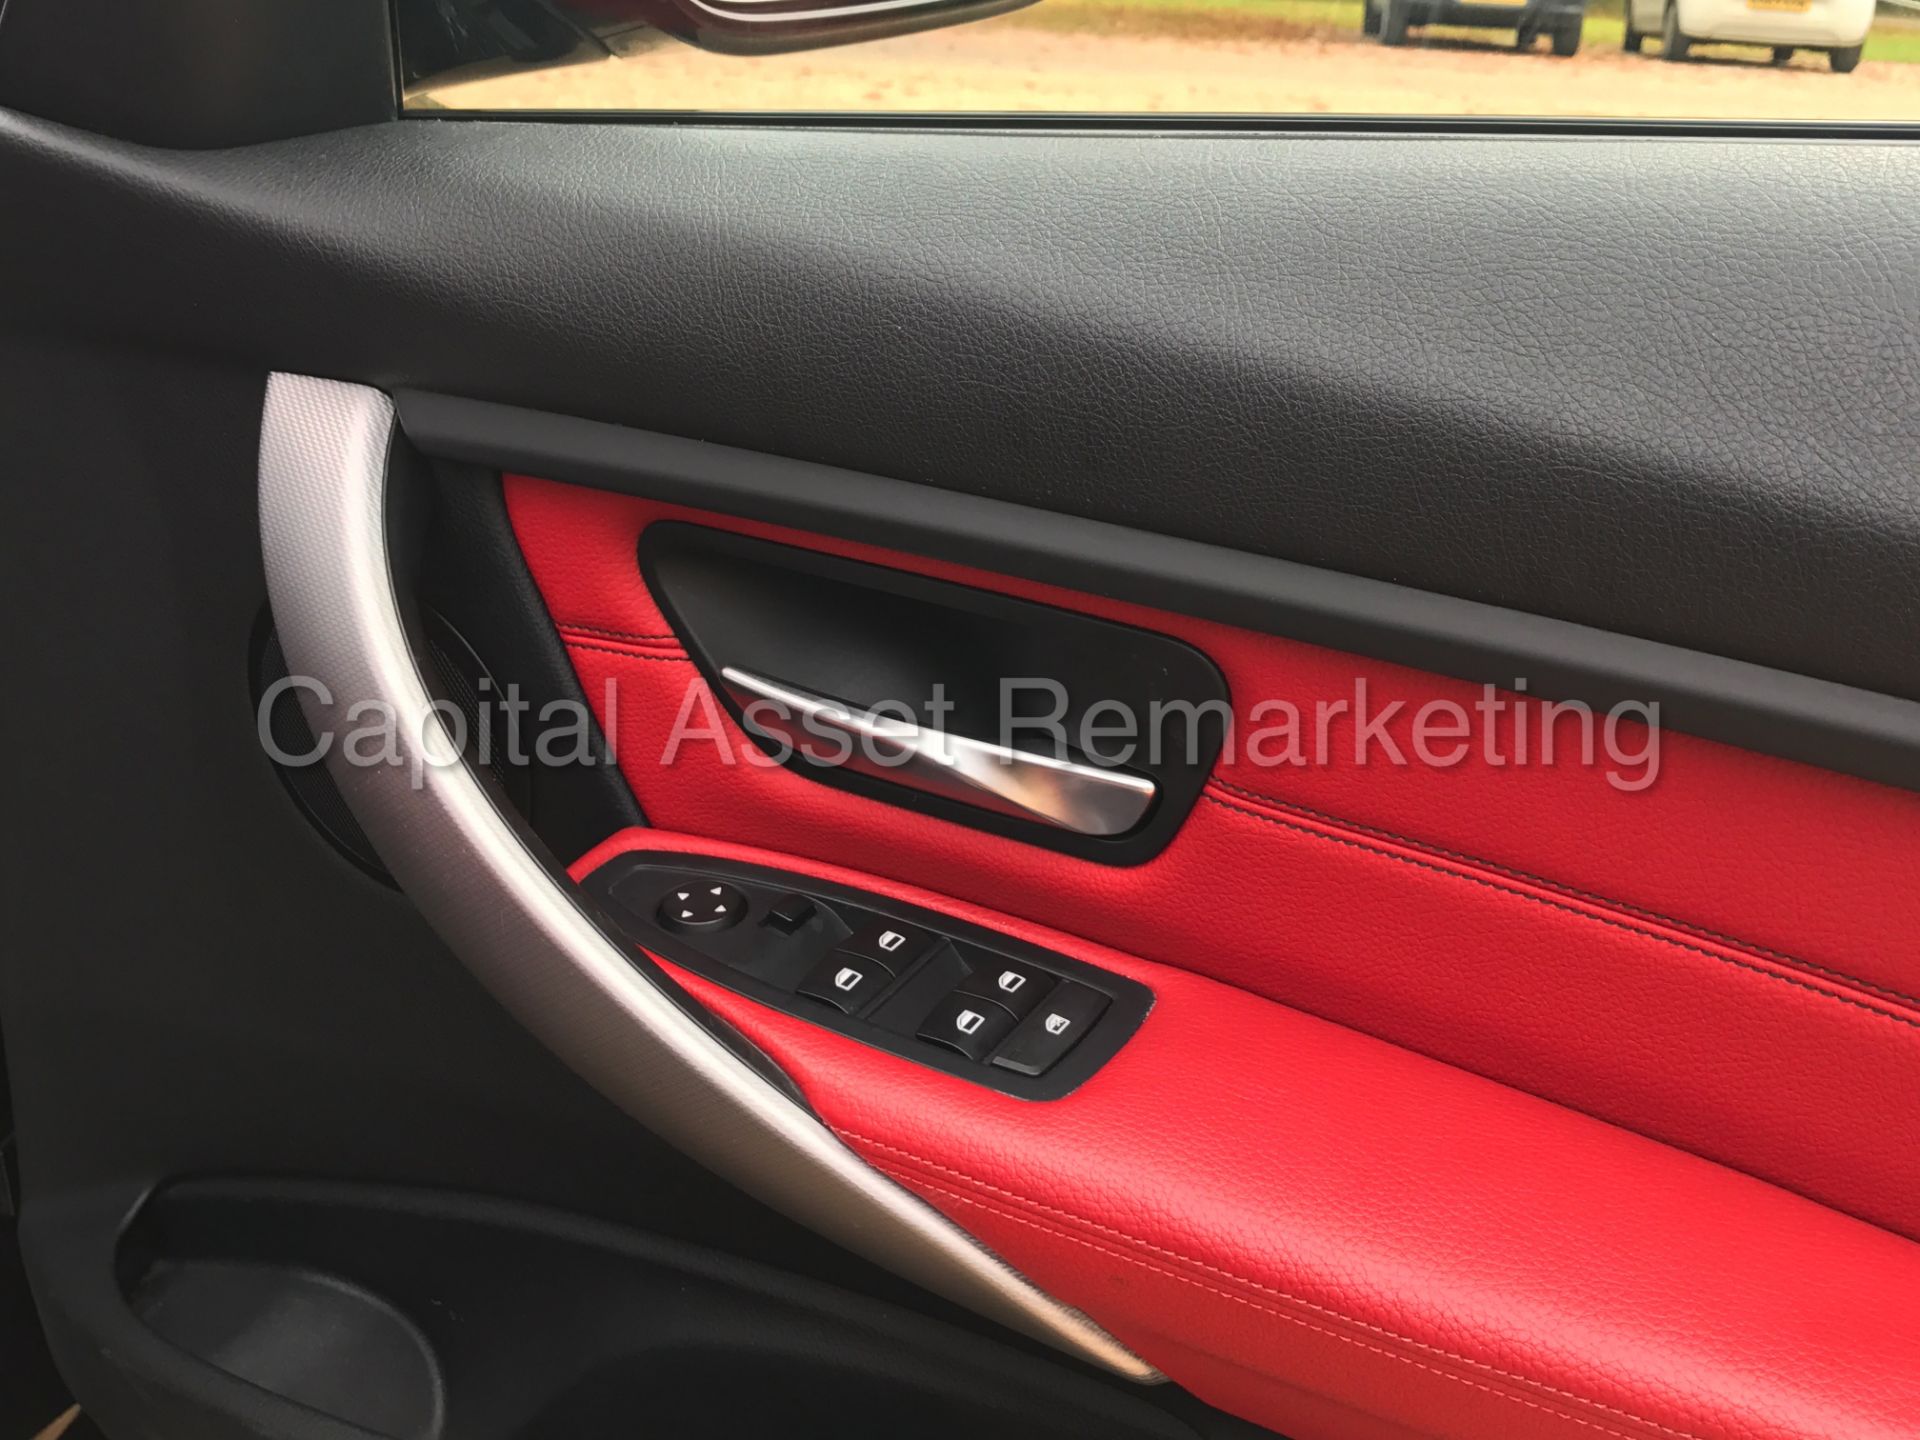 BMW 320D 'M SPORT' (2014 MODEL) '8 SPEED AUTO - LEATHER - SAT NAV' (1 OWNER FROM NEW - FULL HISTORY) - Image 14 of 28